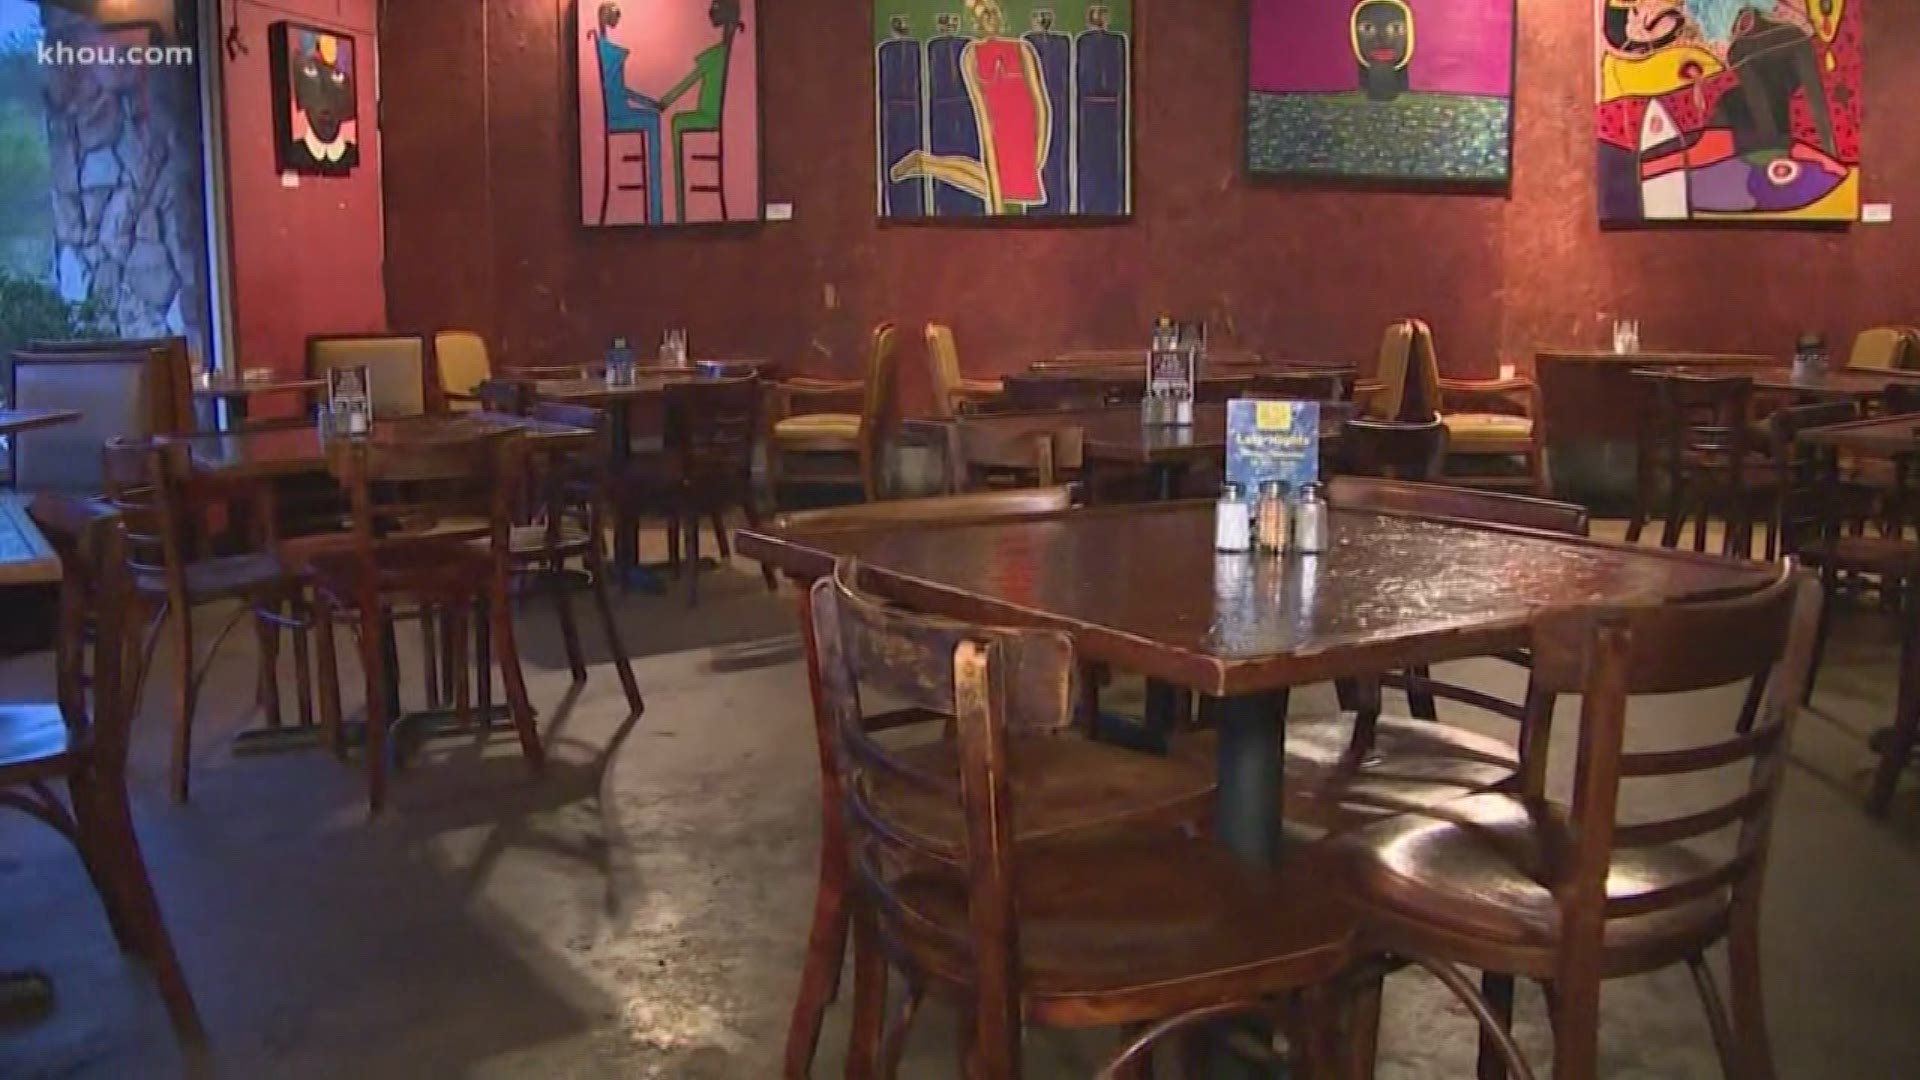 Harris County restaurants have been told they can't allow dining in their restaurants for the next 15 days, so they are trying to adapt and stay in business.